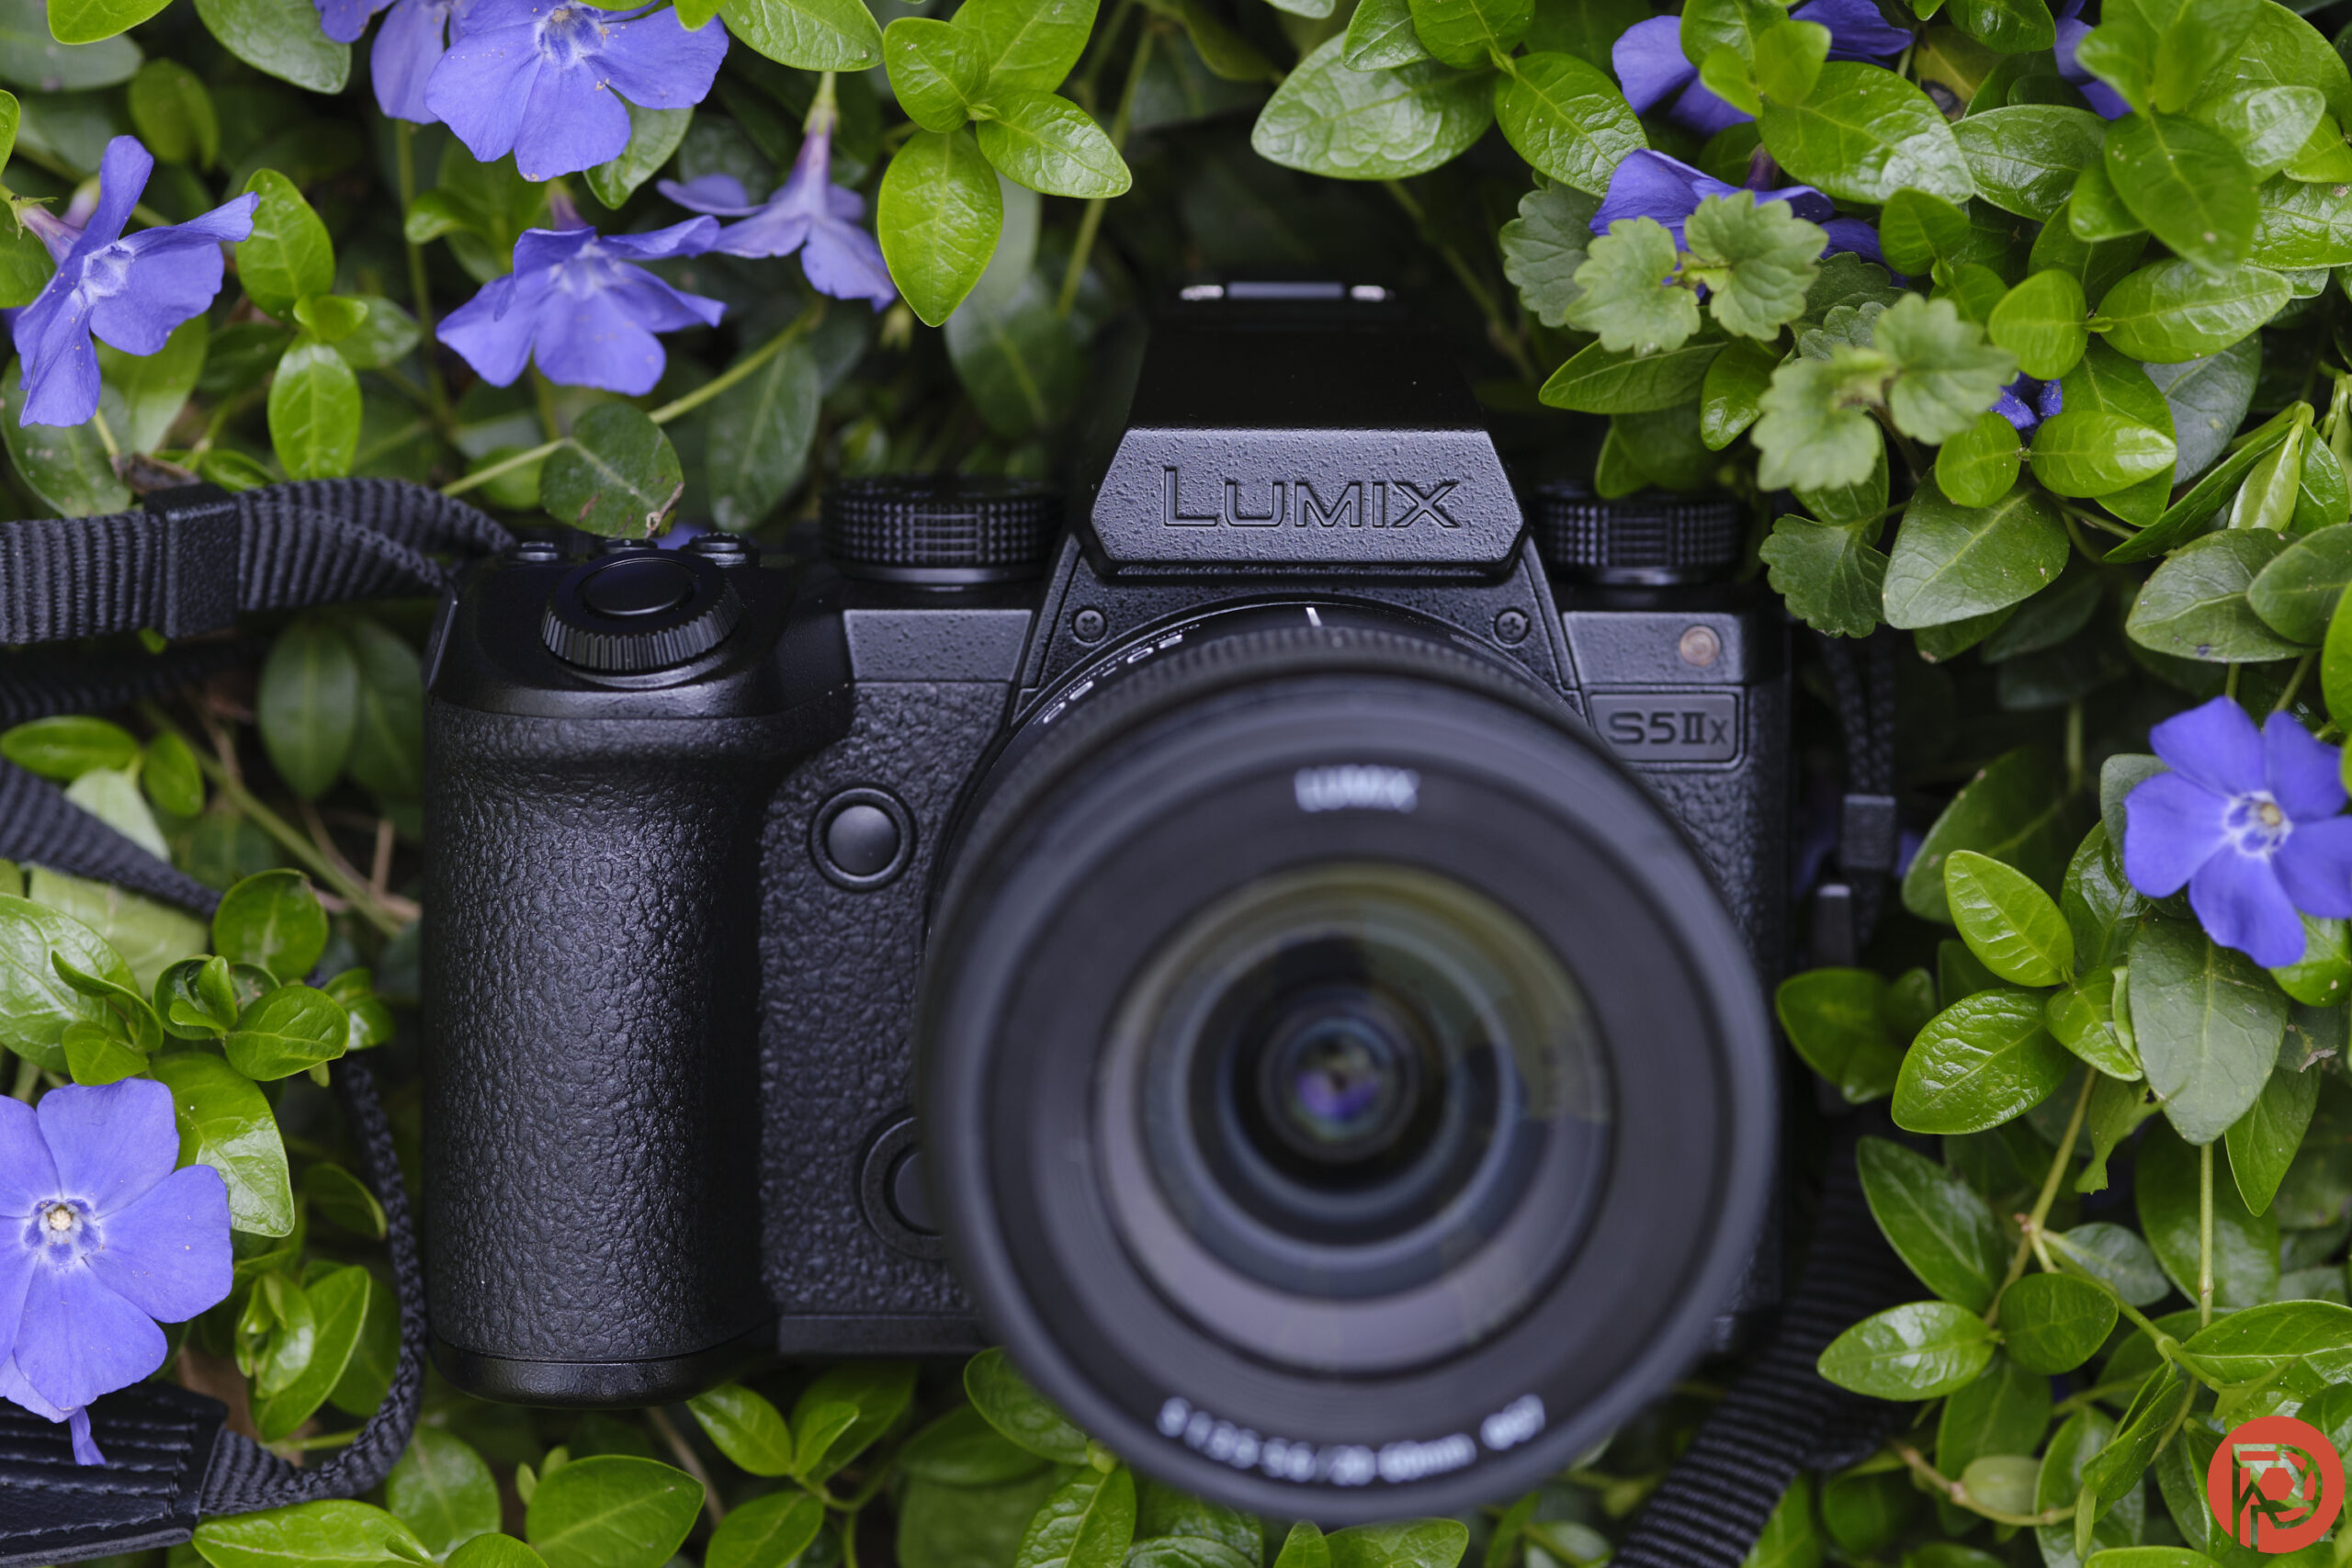 Panasonic S5 IIx Review: Black Out is Beautiful